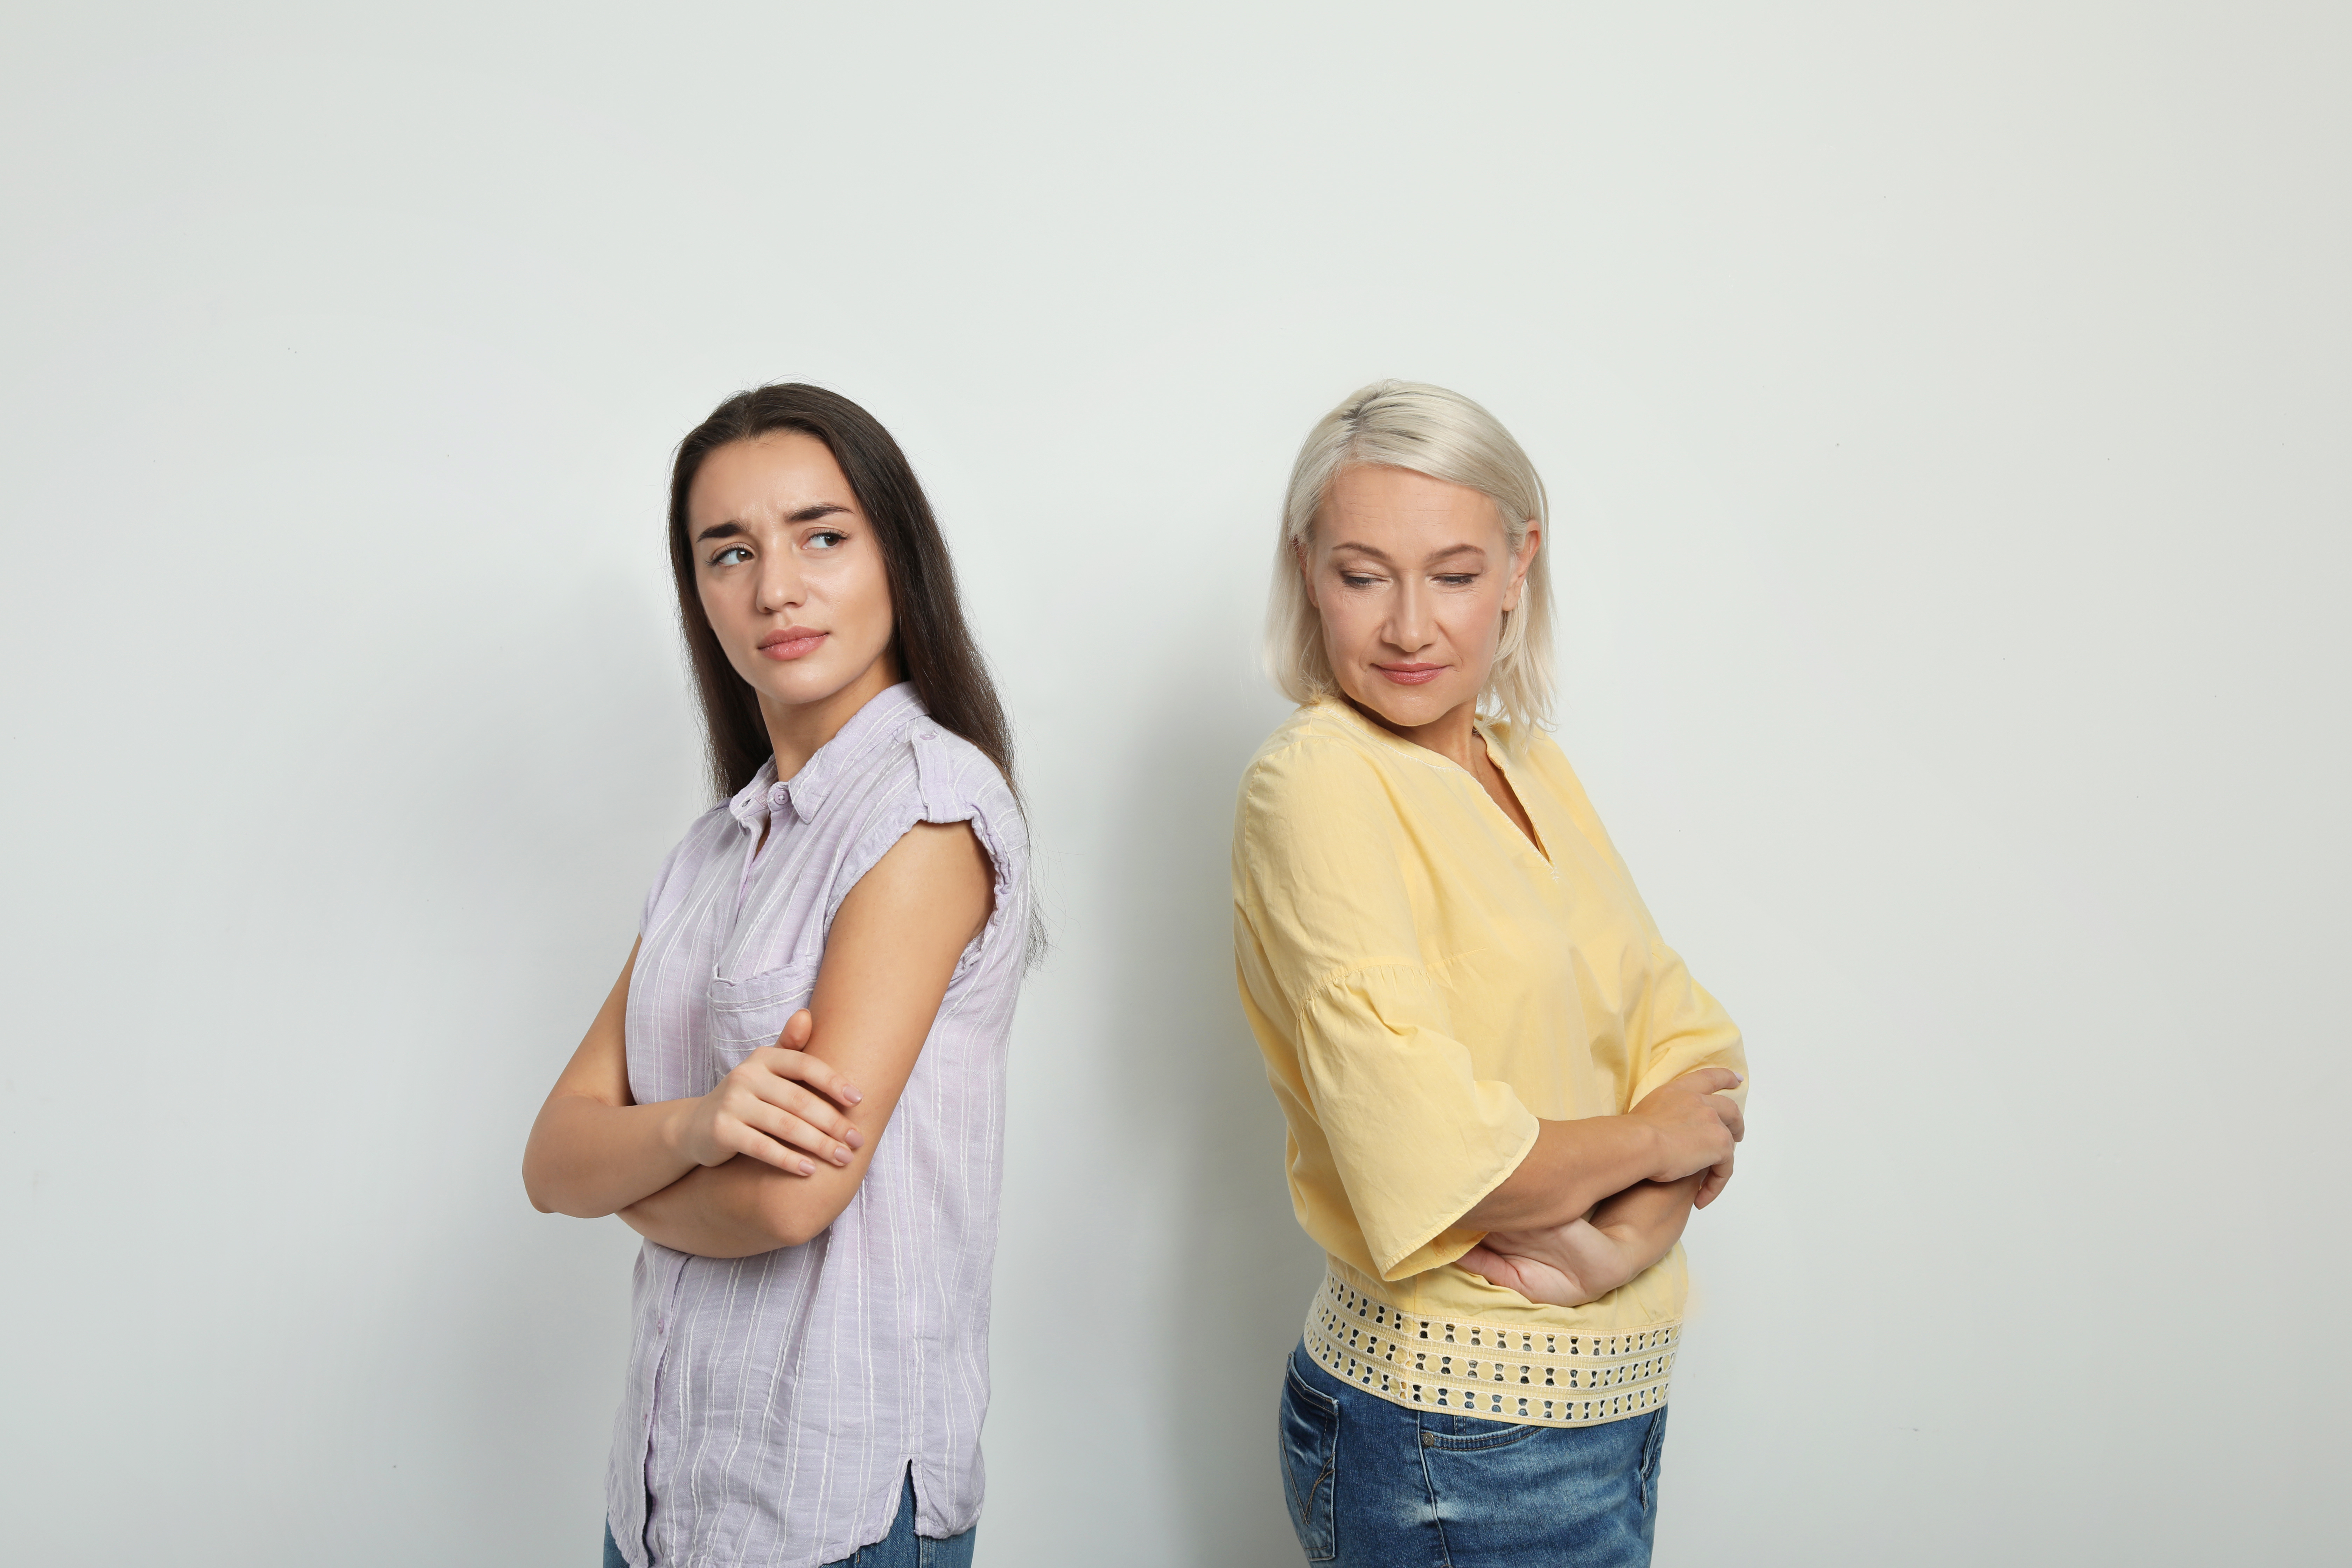 Portrait of young woman and her mother-in-law on white background. Family quarrel